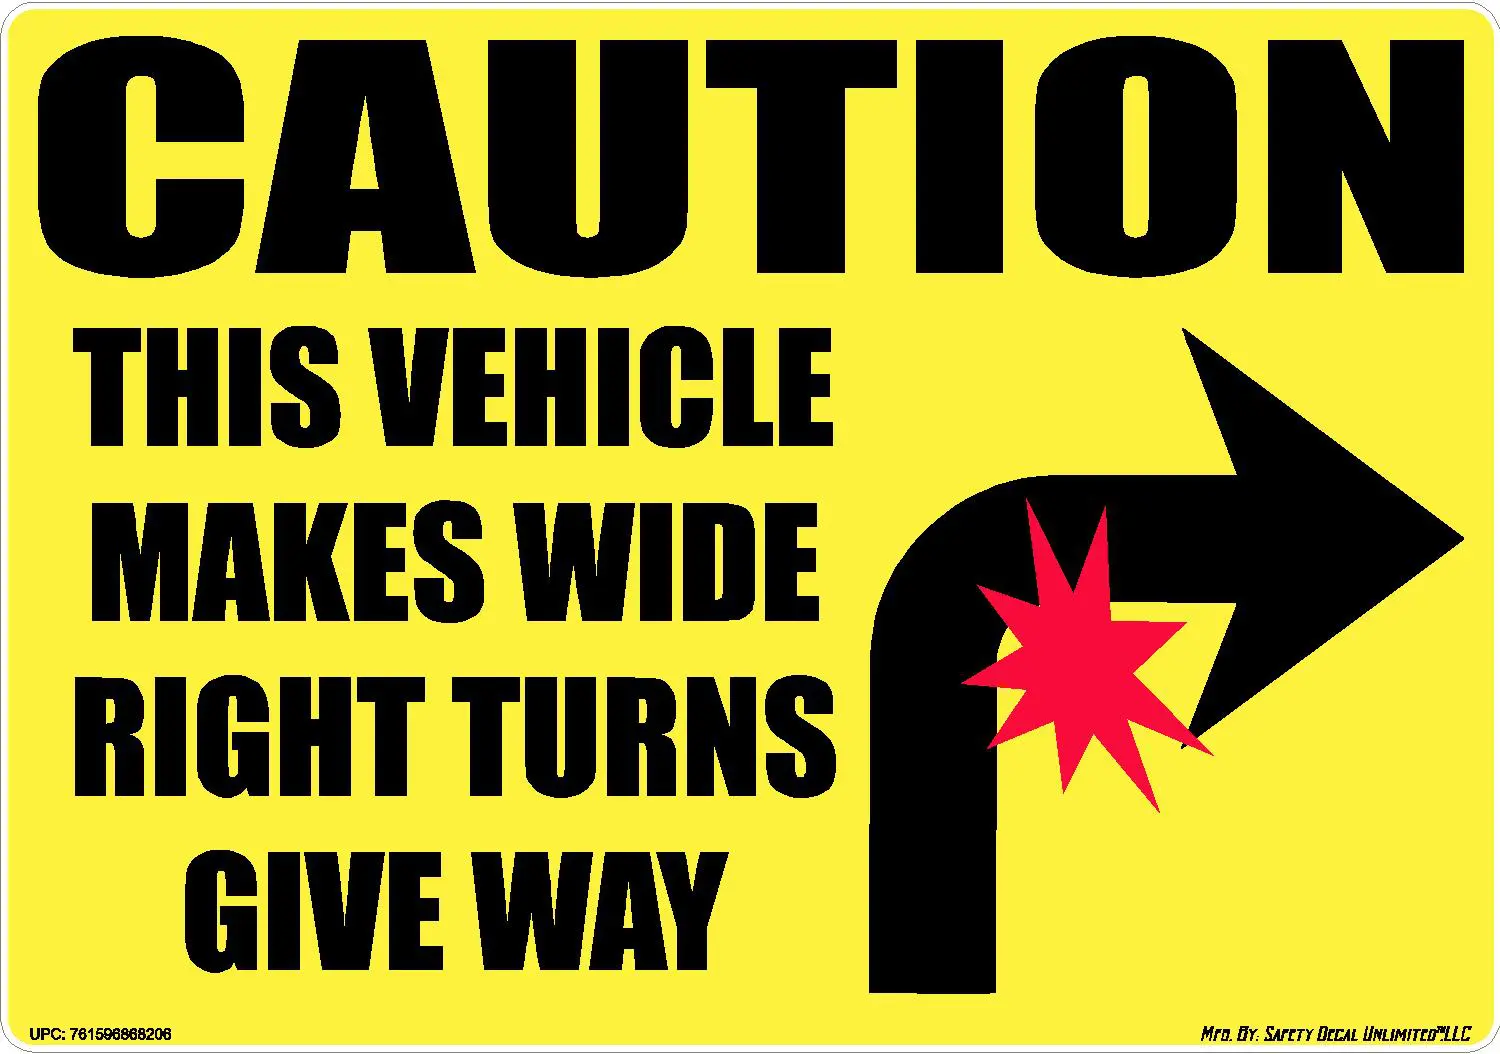 Caution Vehicle Makes Wide Right Turns Arrow Sticker Decal